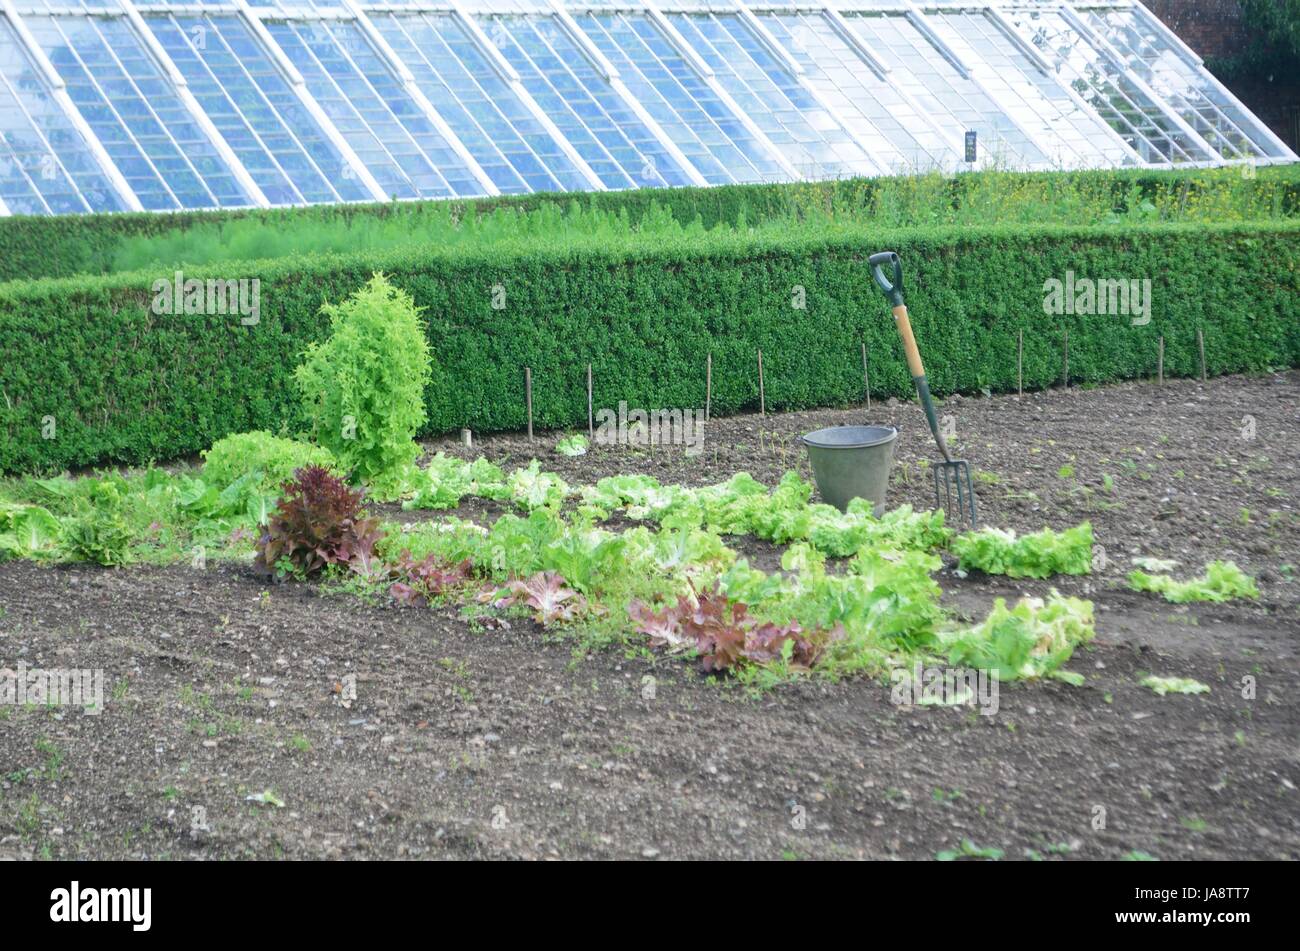 Preparation of large vegetable garden with Lettuce growing Stock Photo